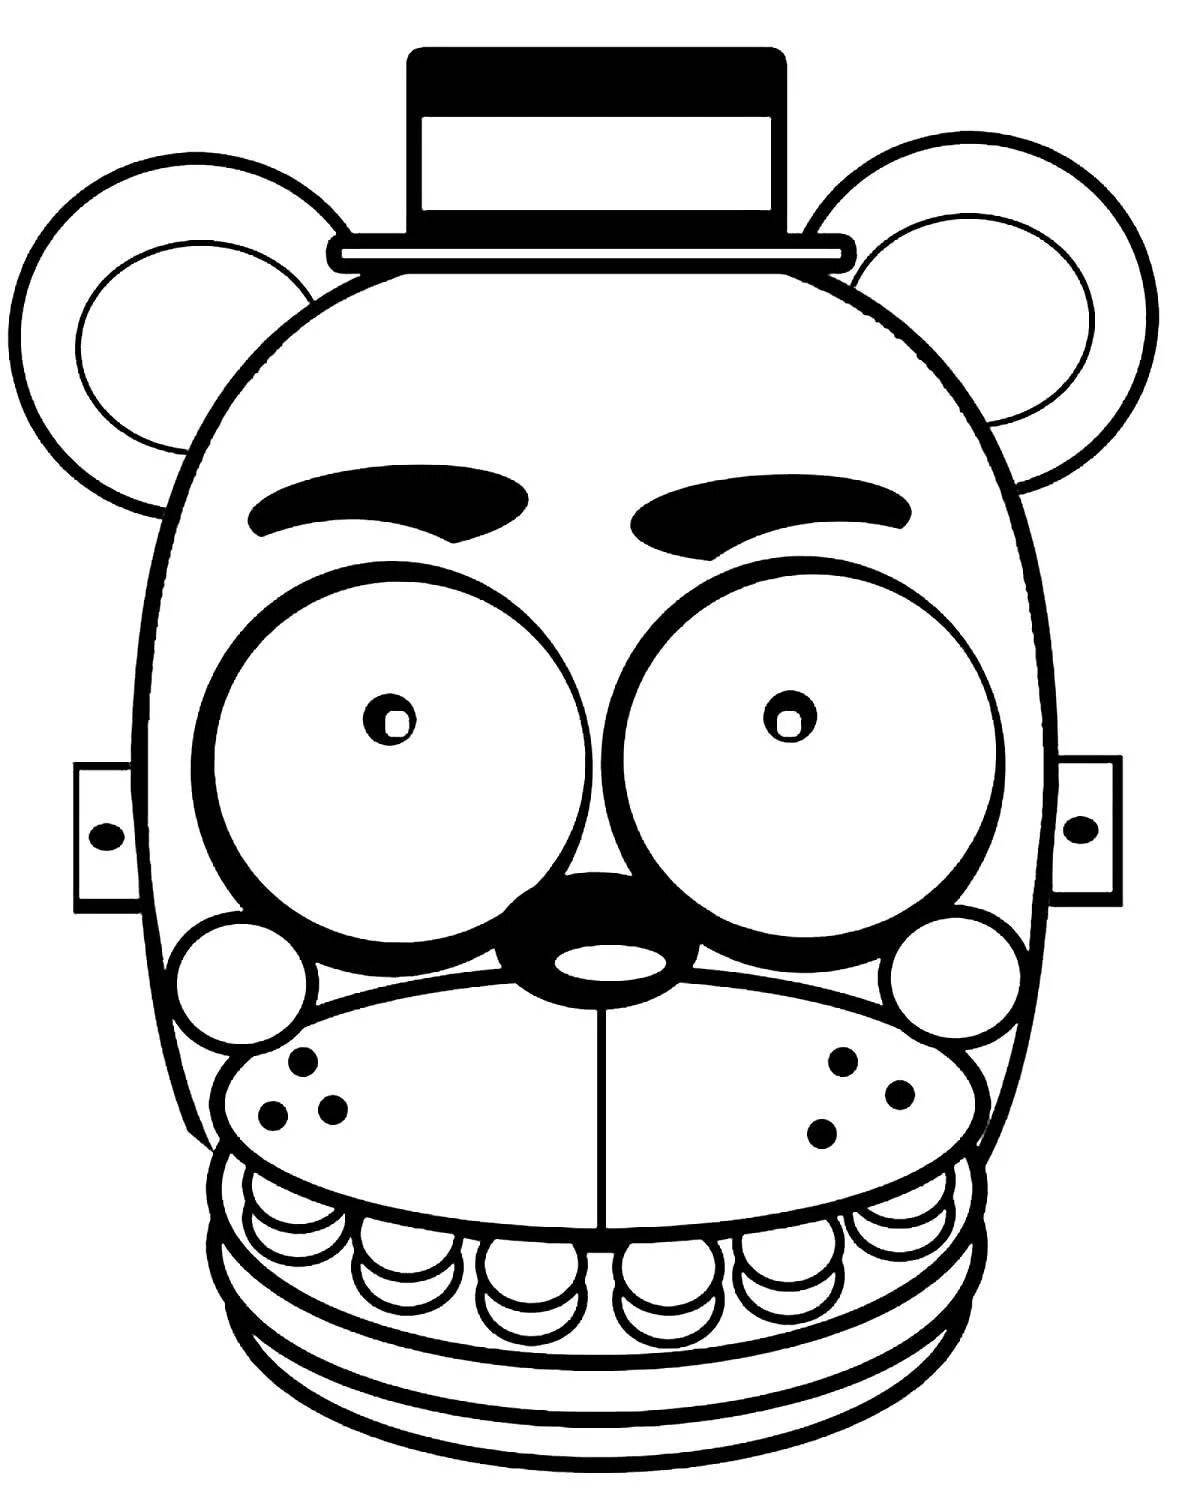 Freddy bear coloring page